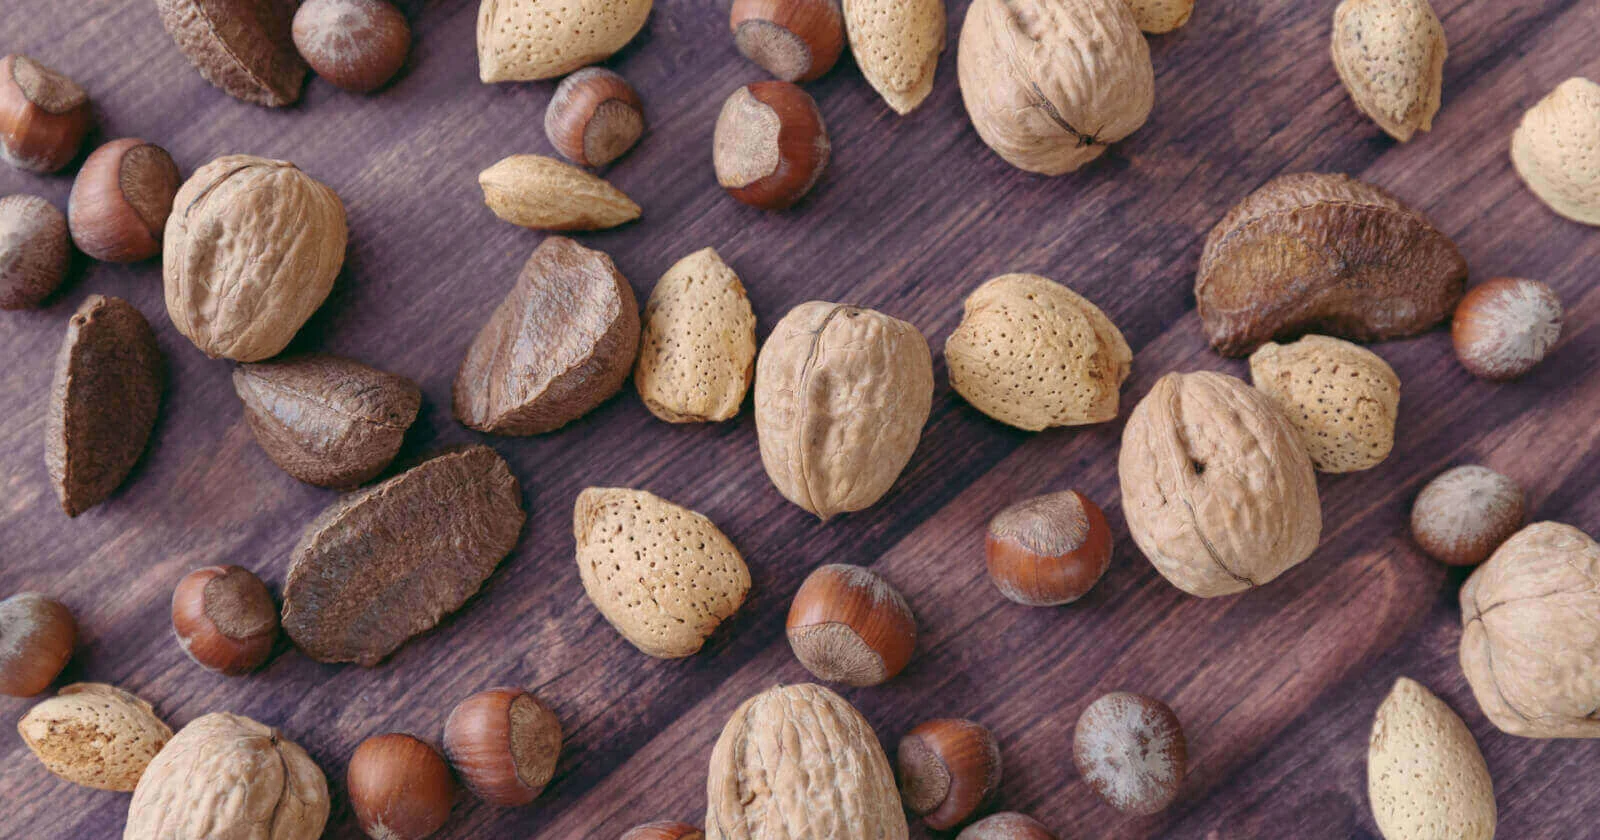 Be Alert and Aware: All You Need to Know About Tree Nut Allergies